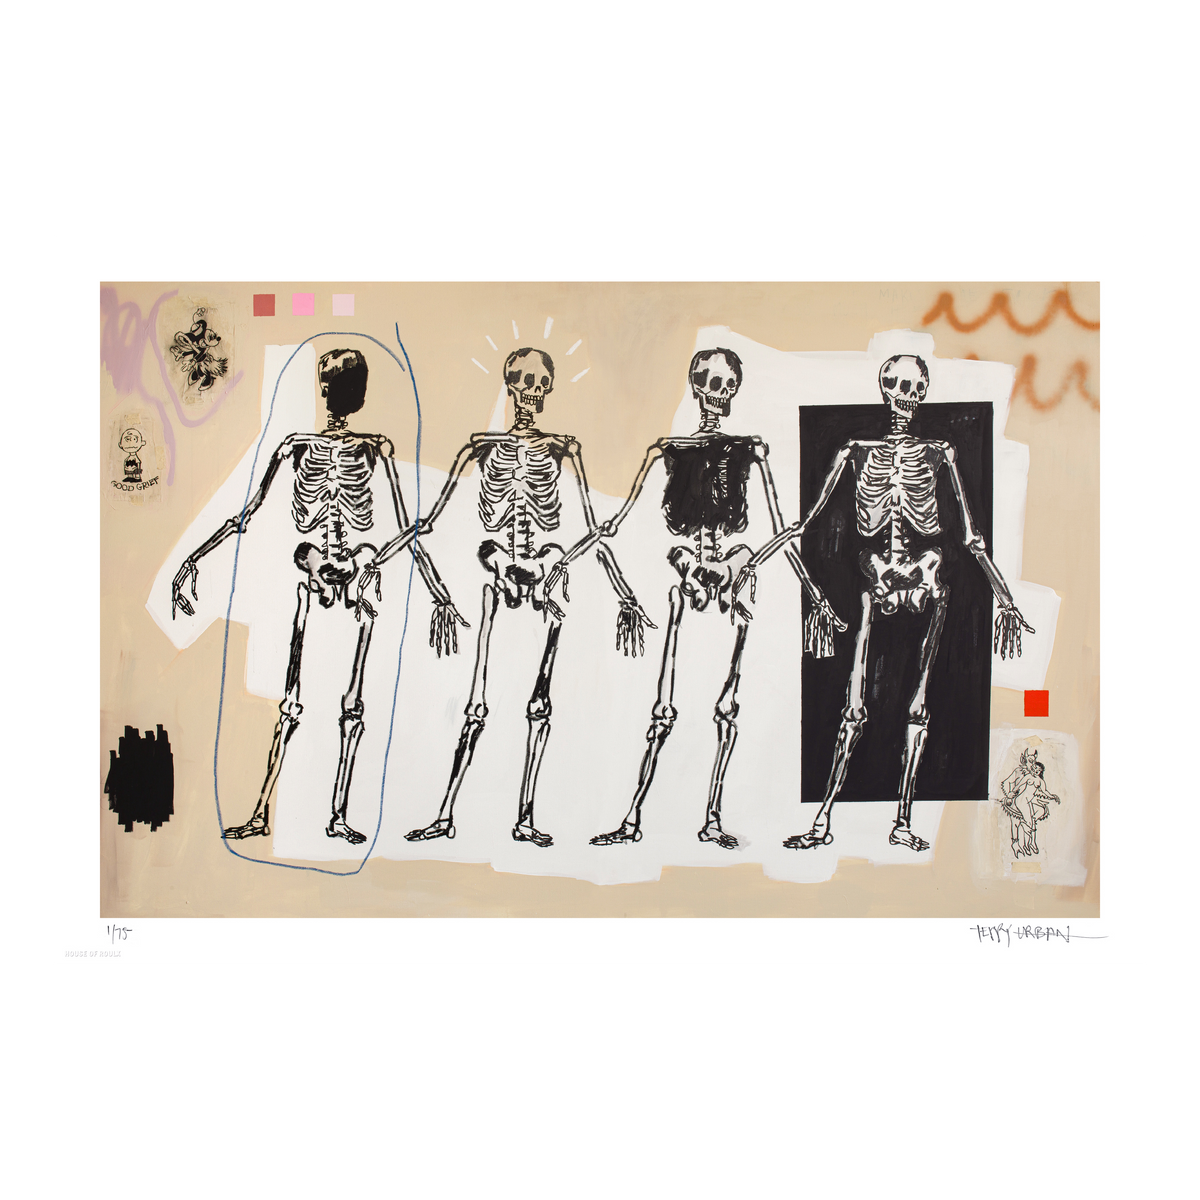 Terry Urban &quot;Dancing on My Grave&quot; - Archival Print, Limited Edition of 75 - 16 x 24&quot;